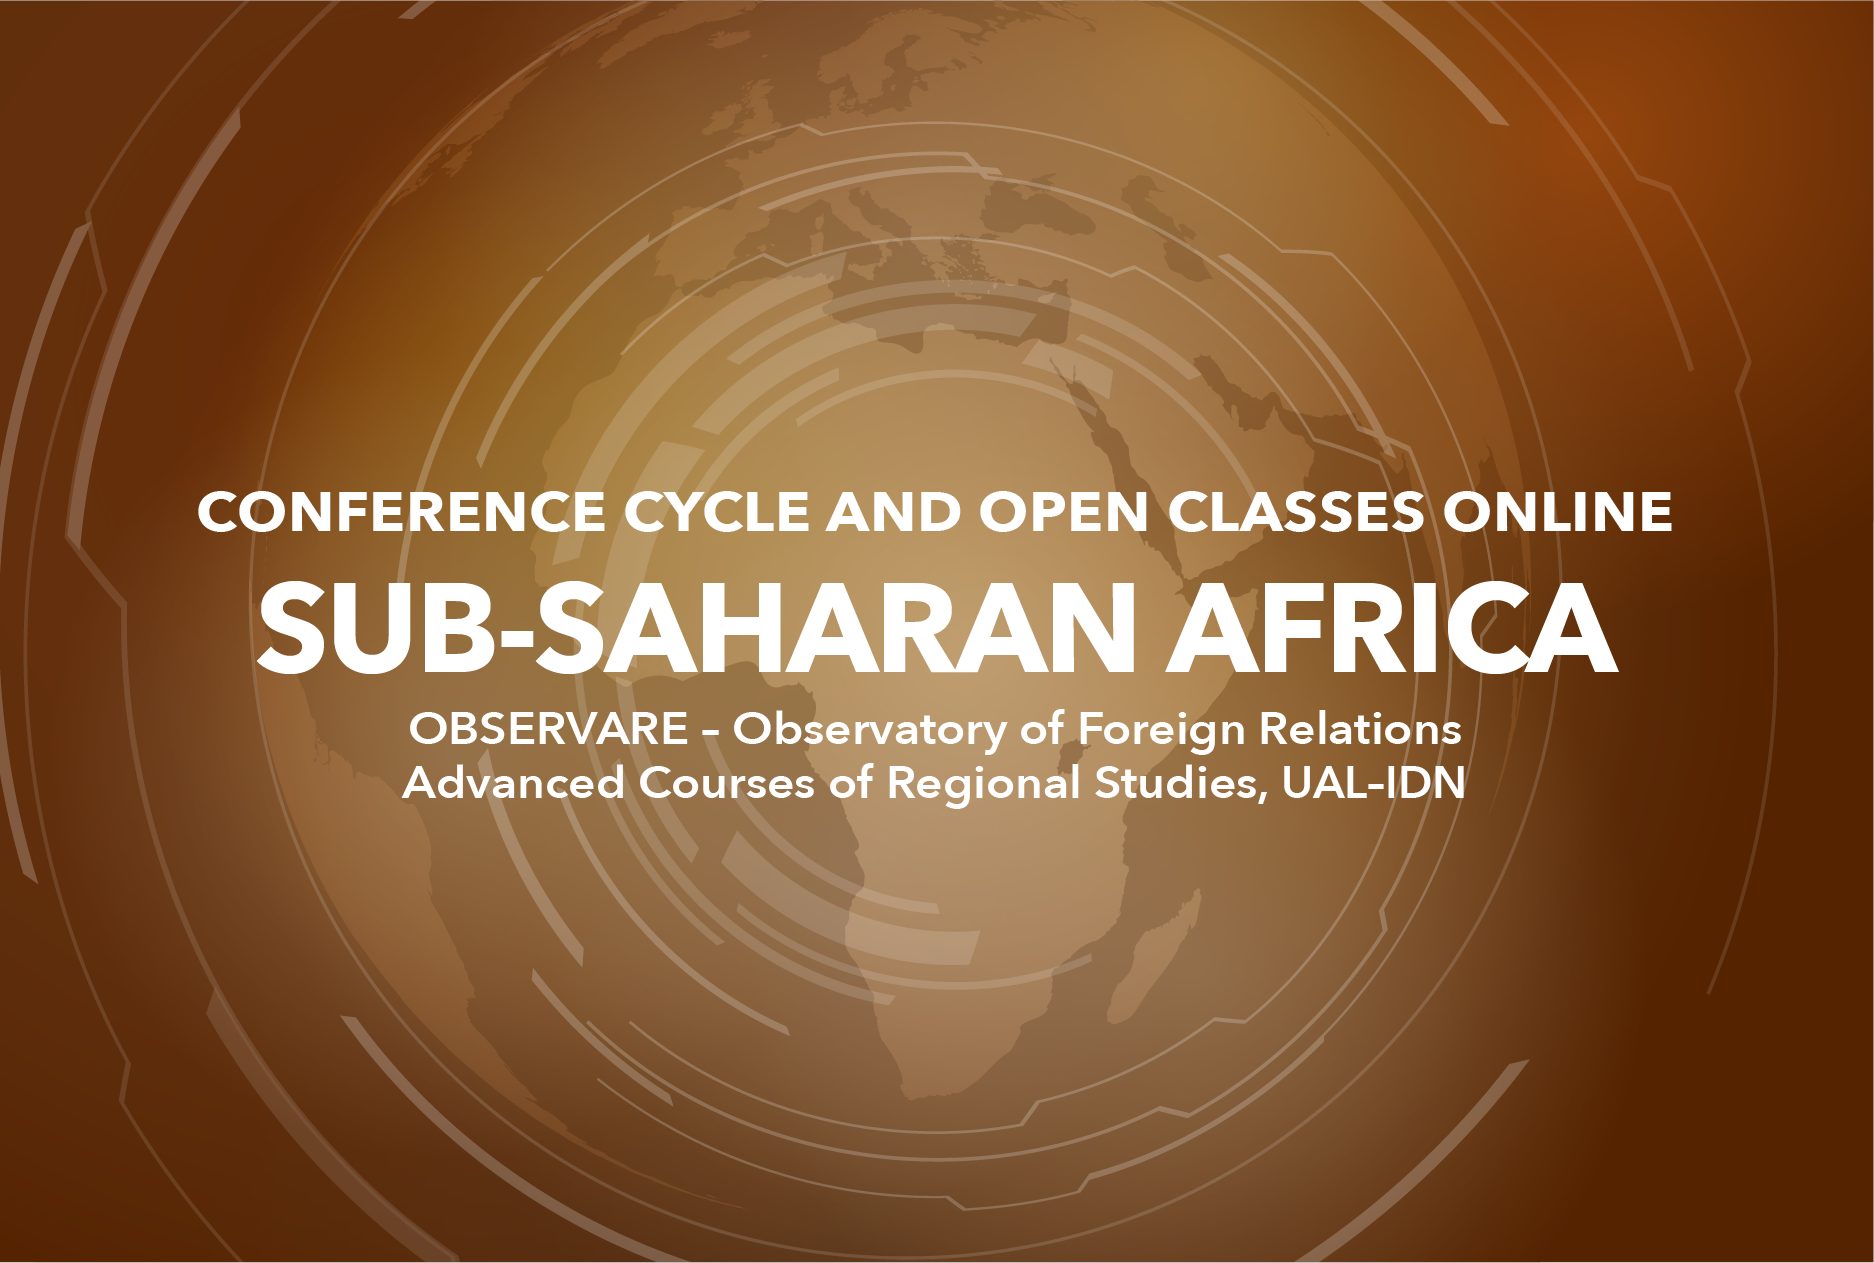 “SUB-SAHARAN AFRICA” – CONFERENCE CYCLE AND OPEN CLASSES 2022 | UAL-IDN